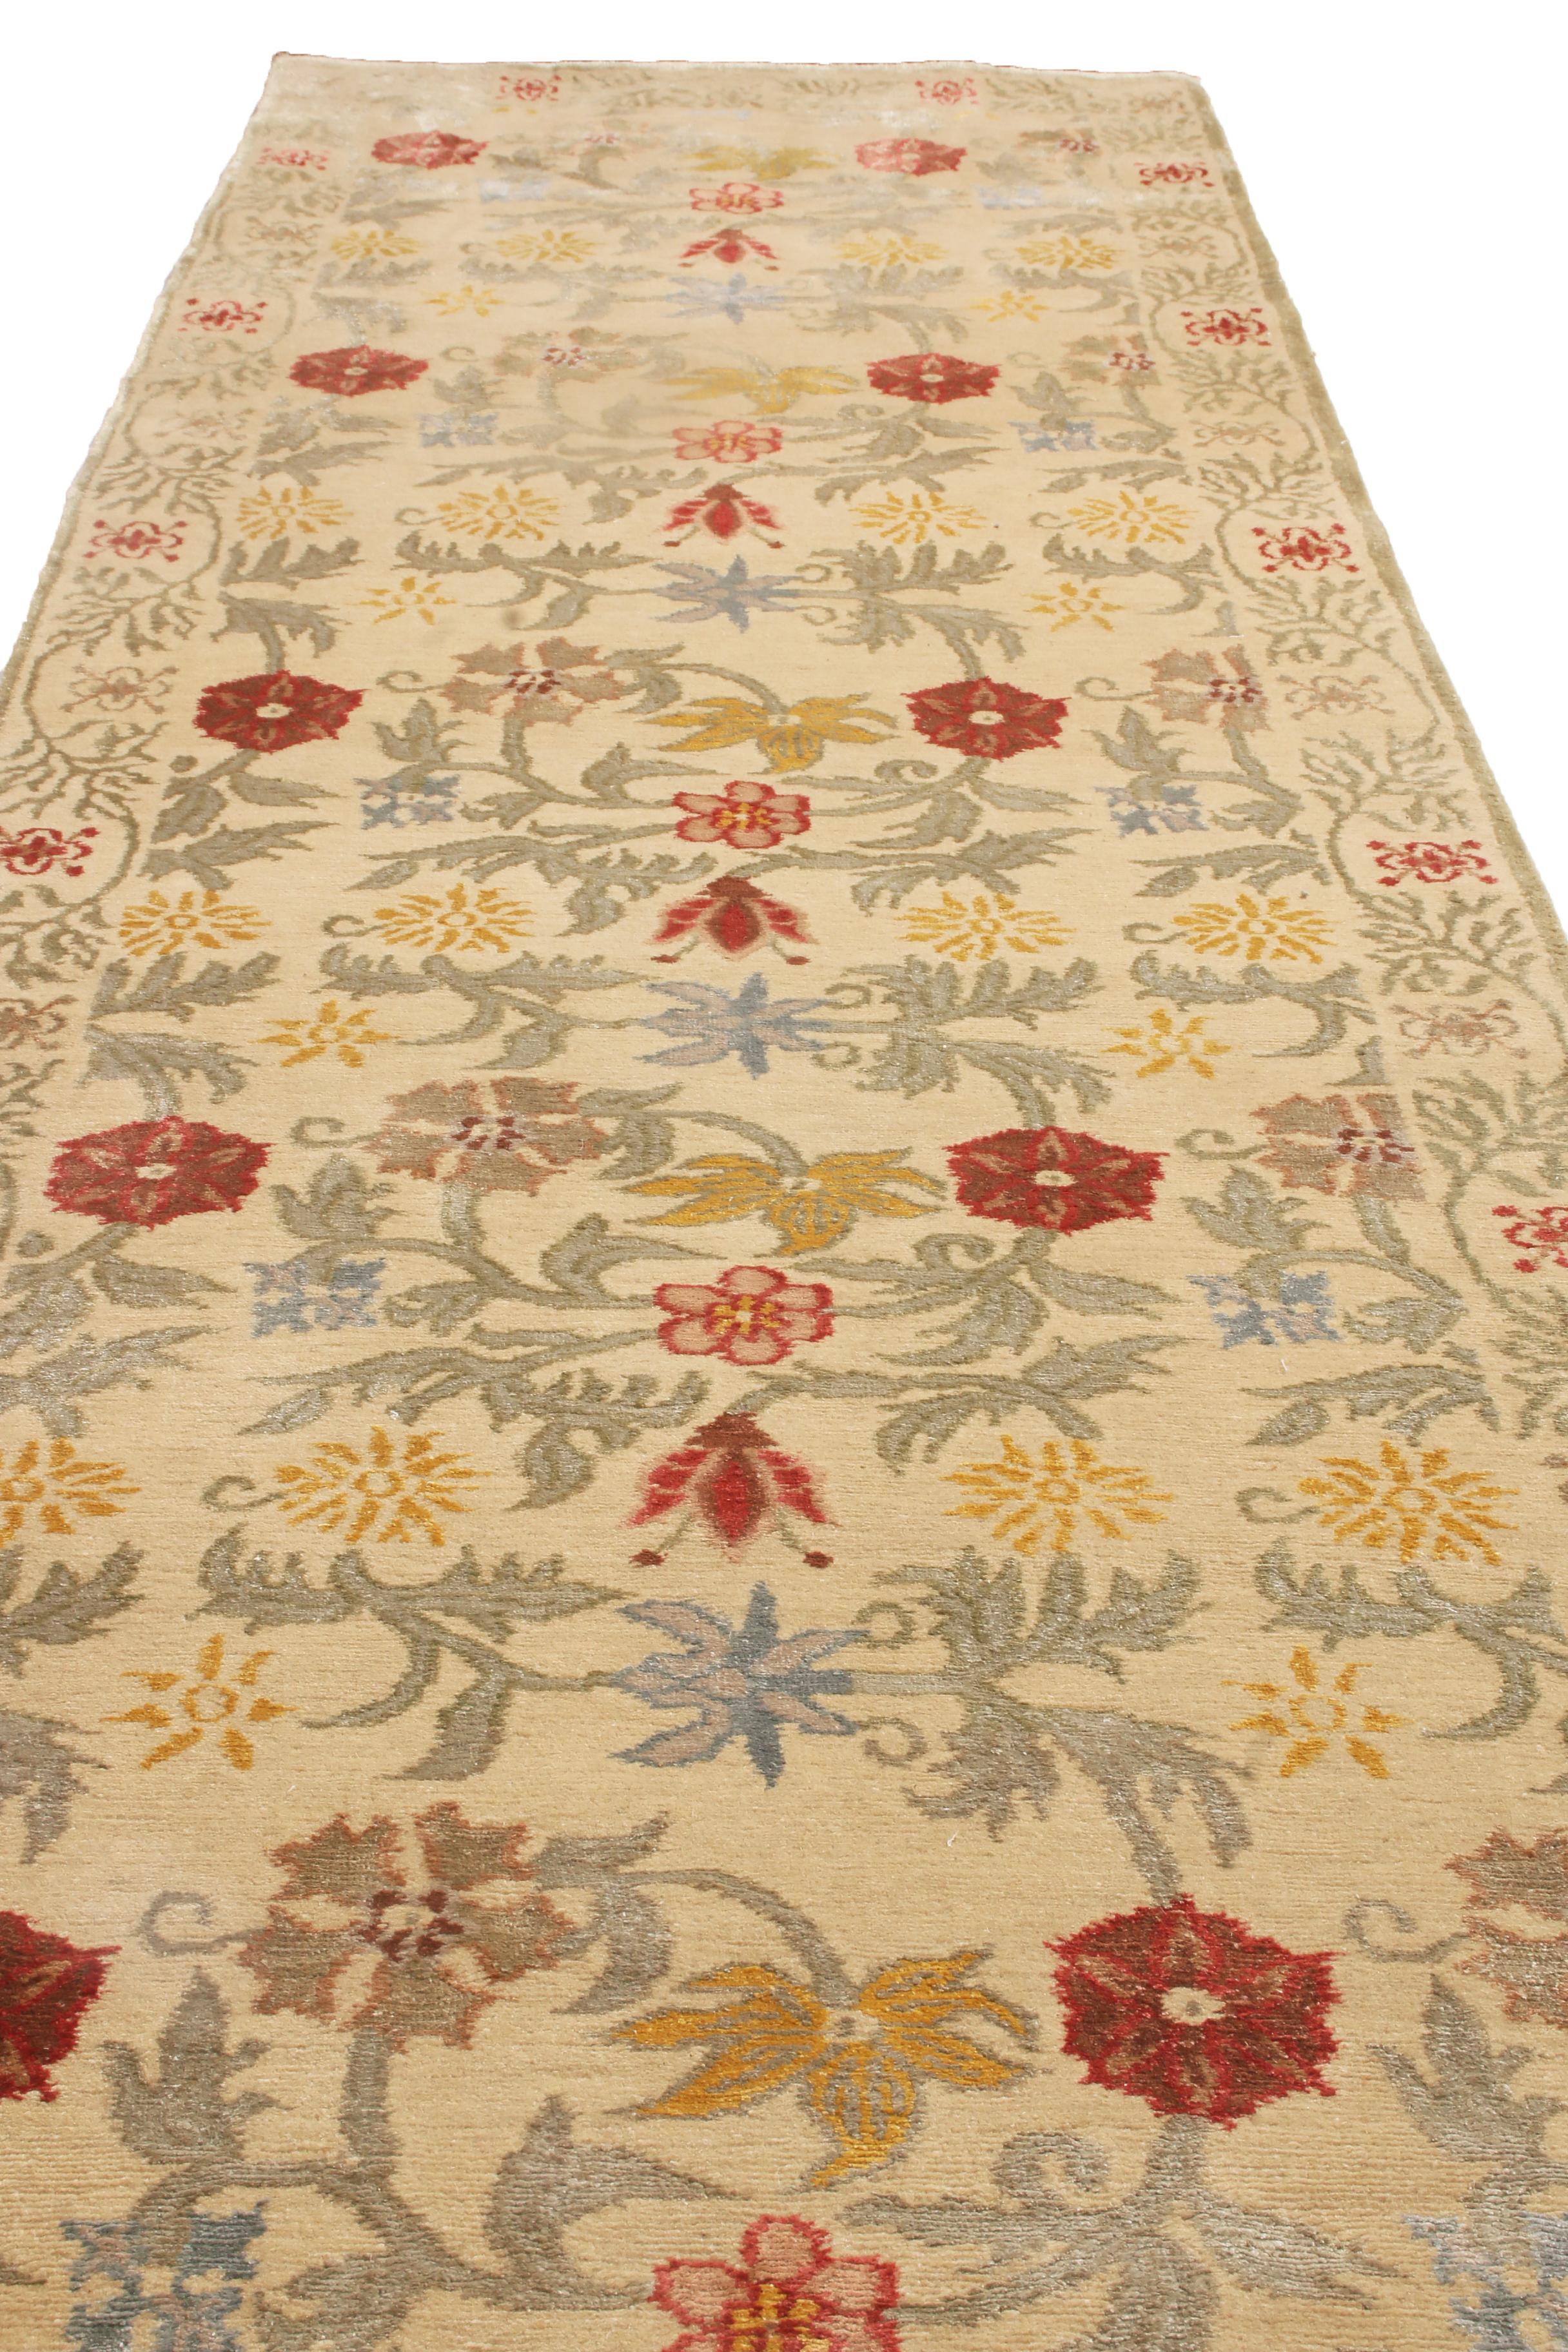 Nepalese Rug & Kilim's Bilbao Spanish Design Beige and Multicolor Floral Wool-Silk Runner For Sale